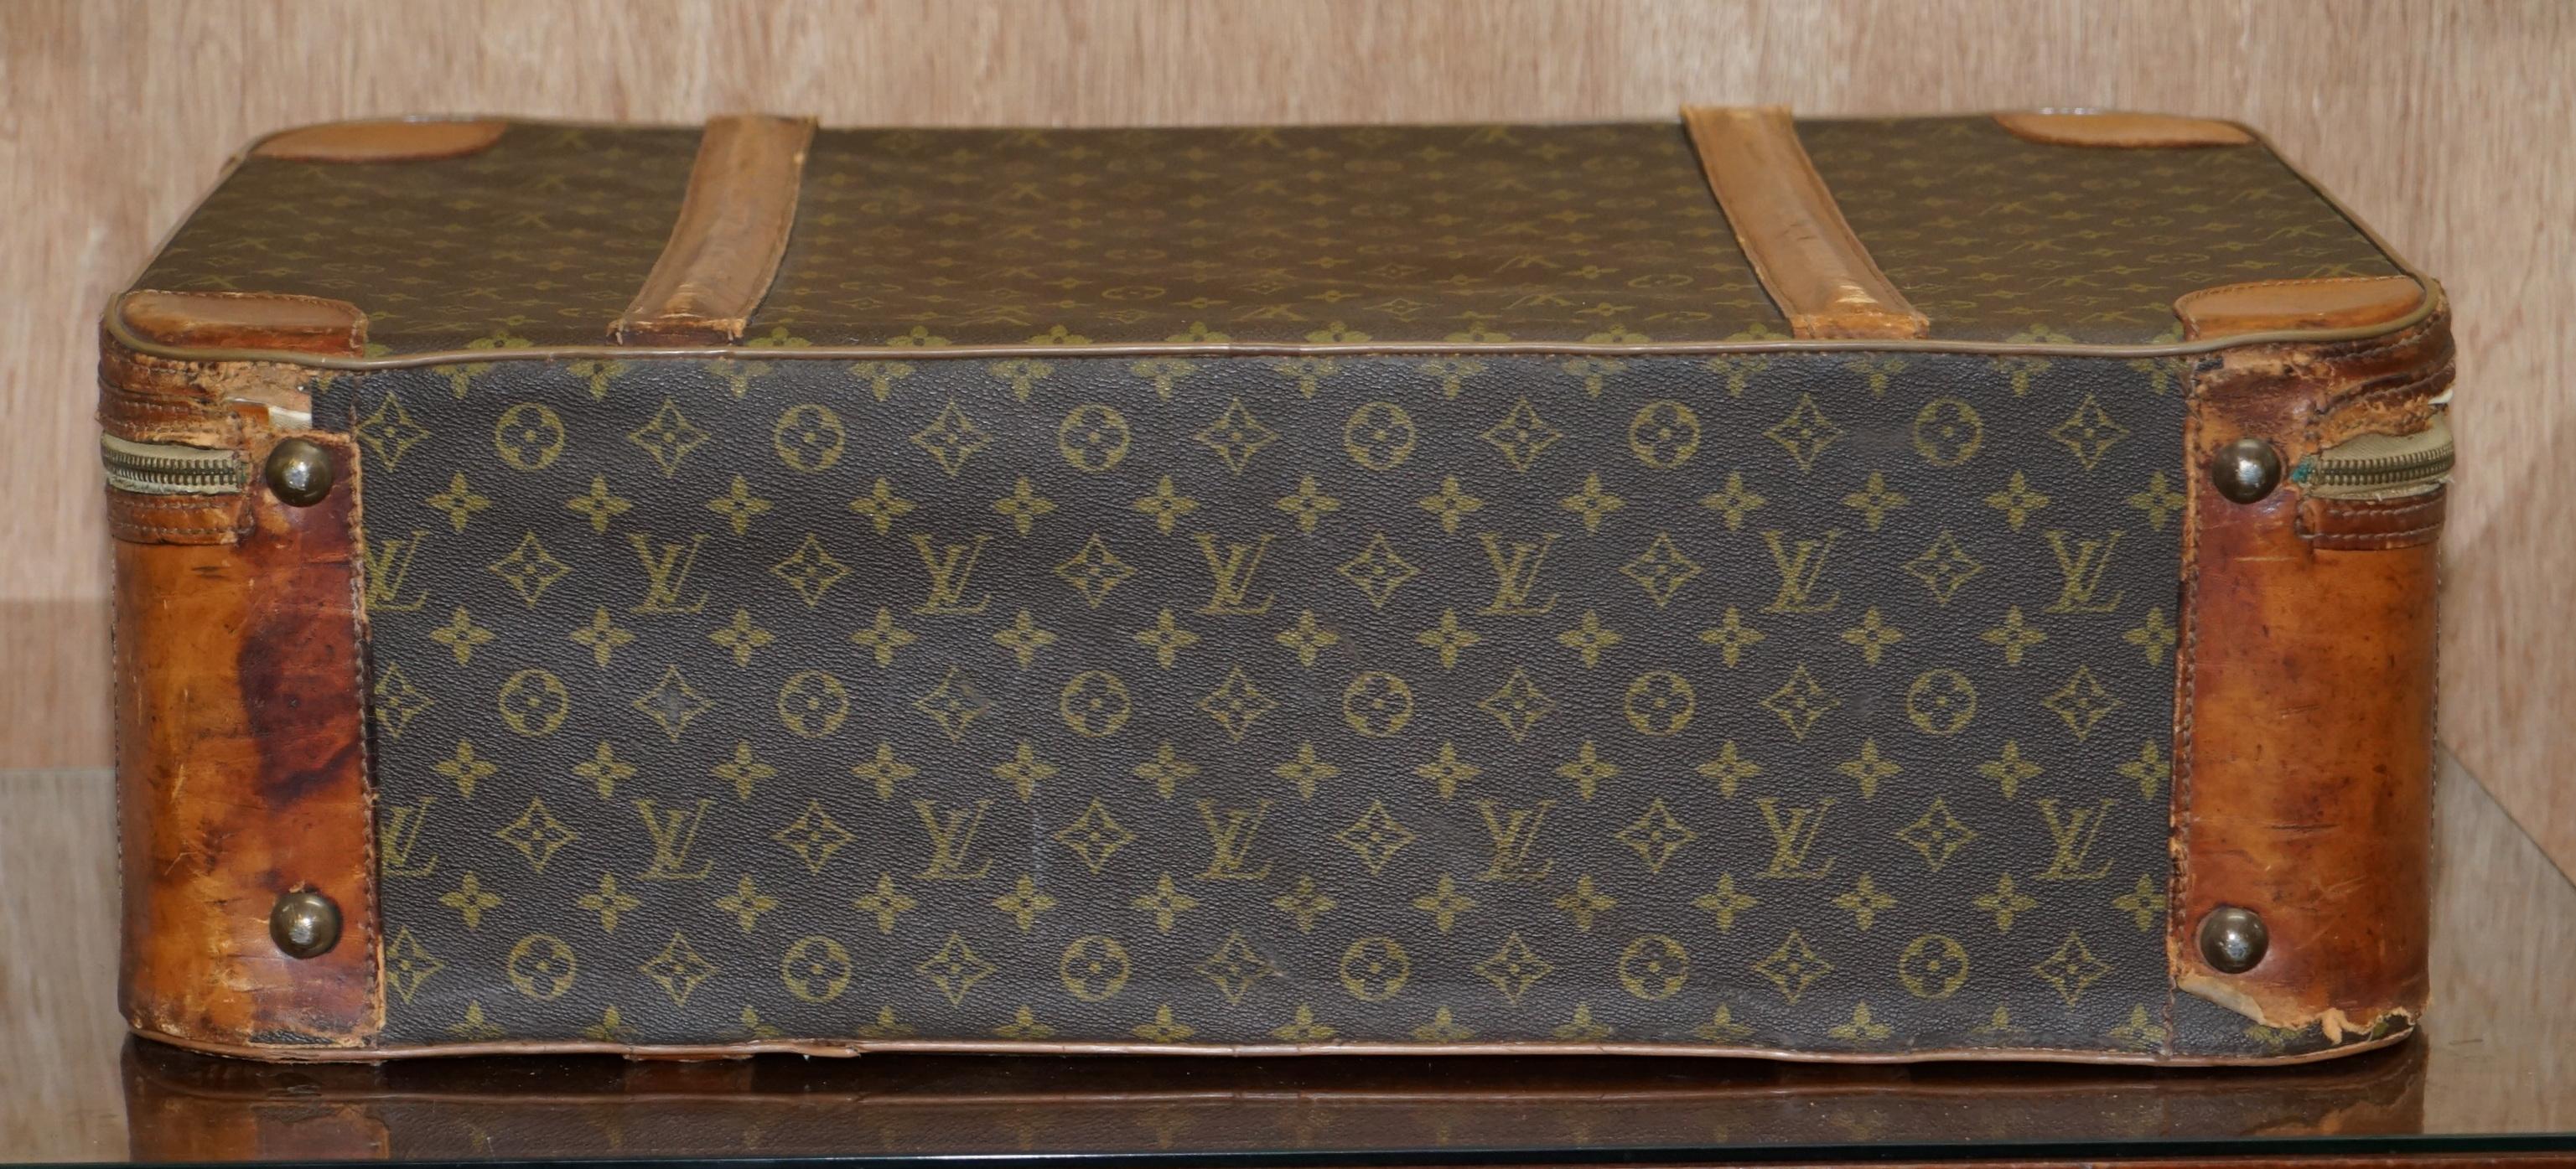 1 of 2 Vintage Brown Leather Louis Vuitton Strapped Bronze Monogram Suitcases 5